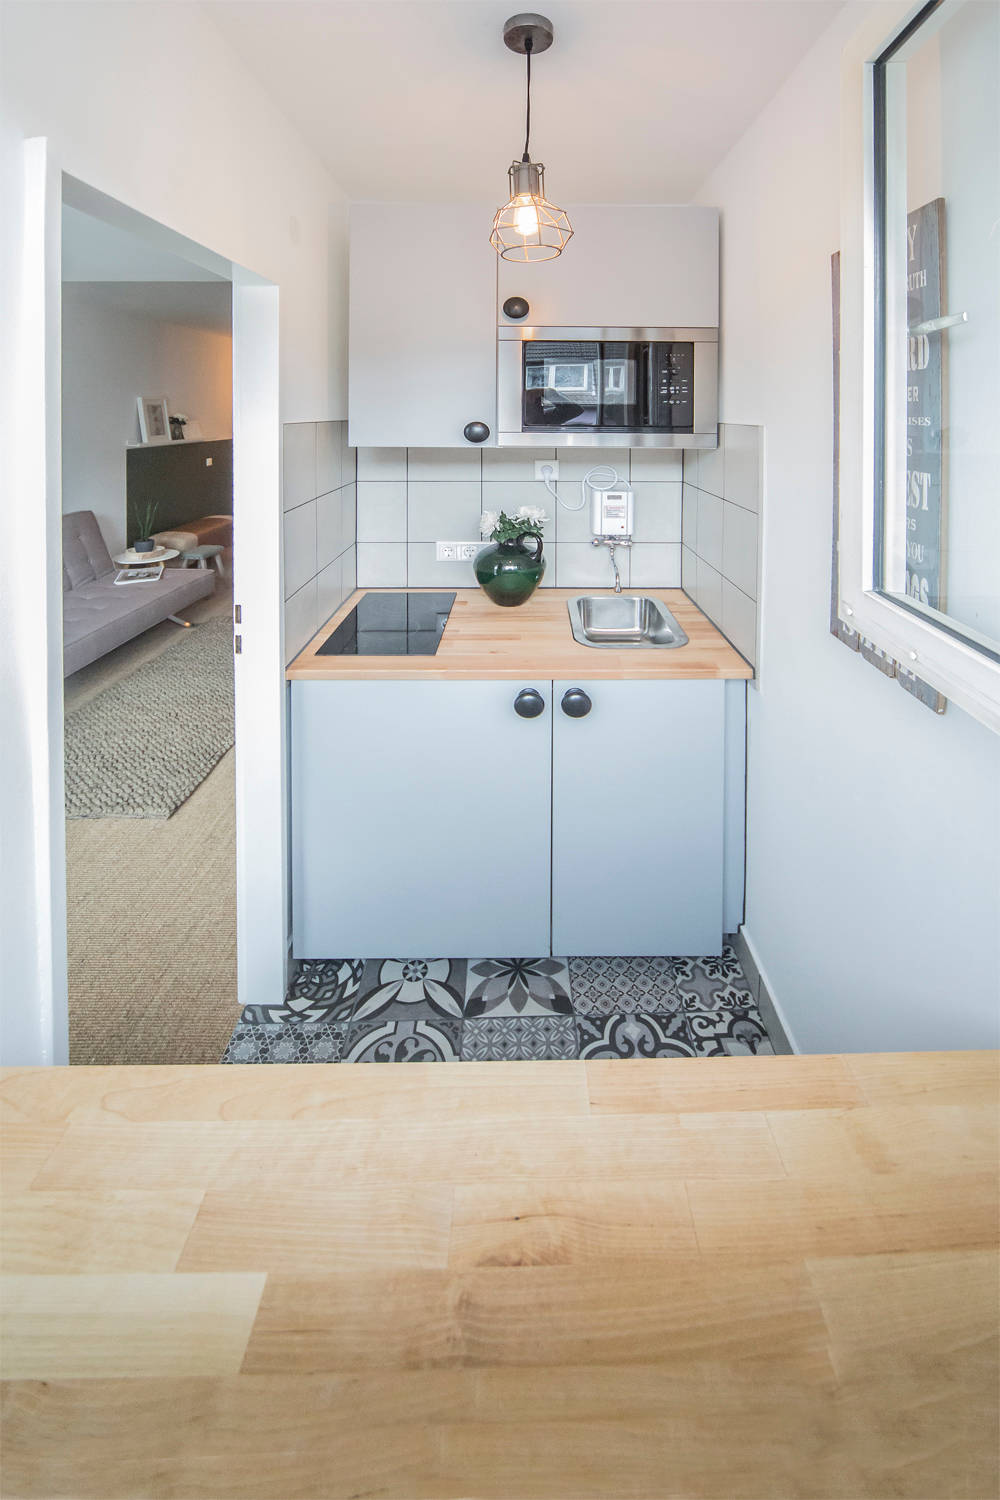 10 Tiny Micro Kitchens for Small Space Living | Houzz UK